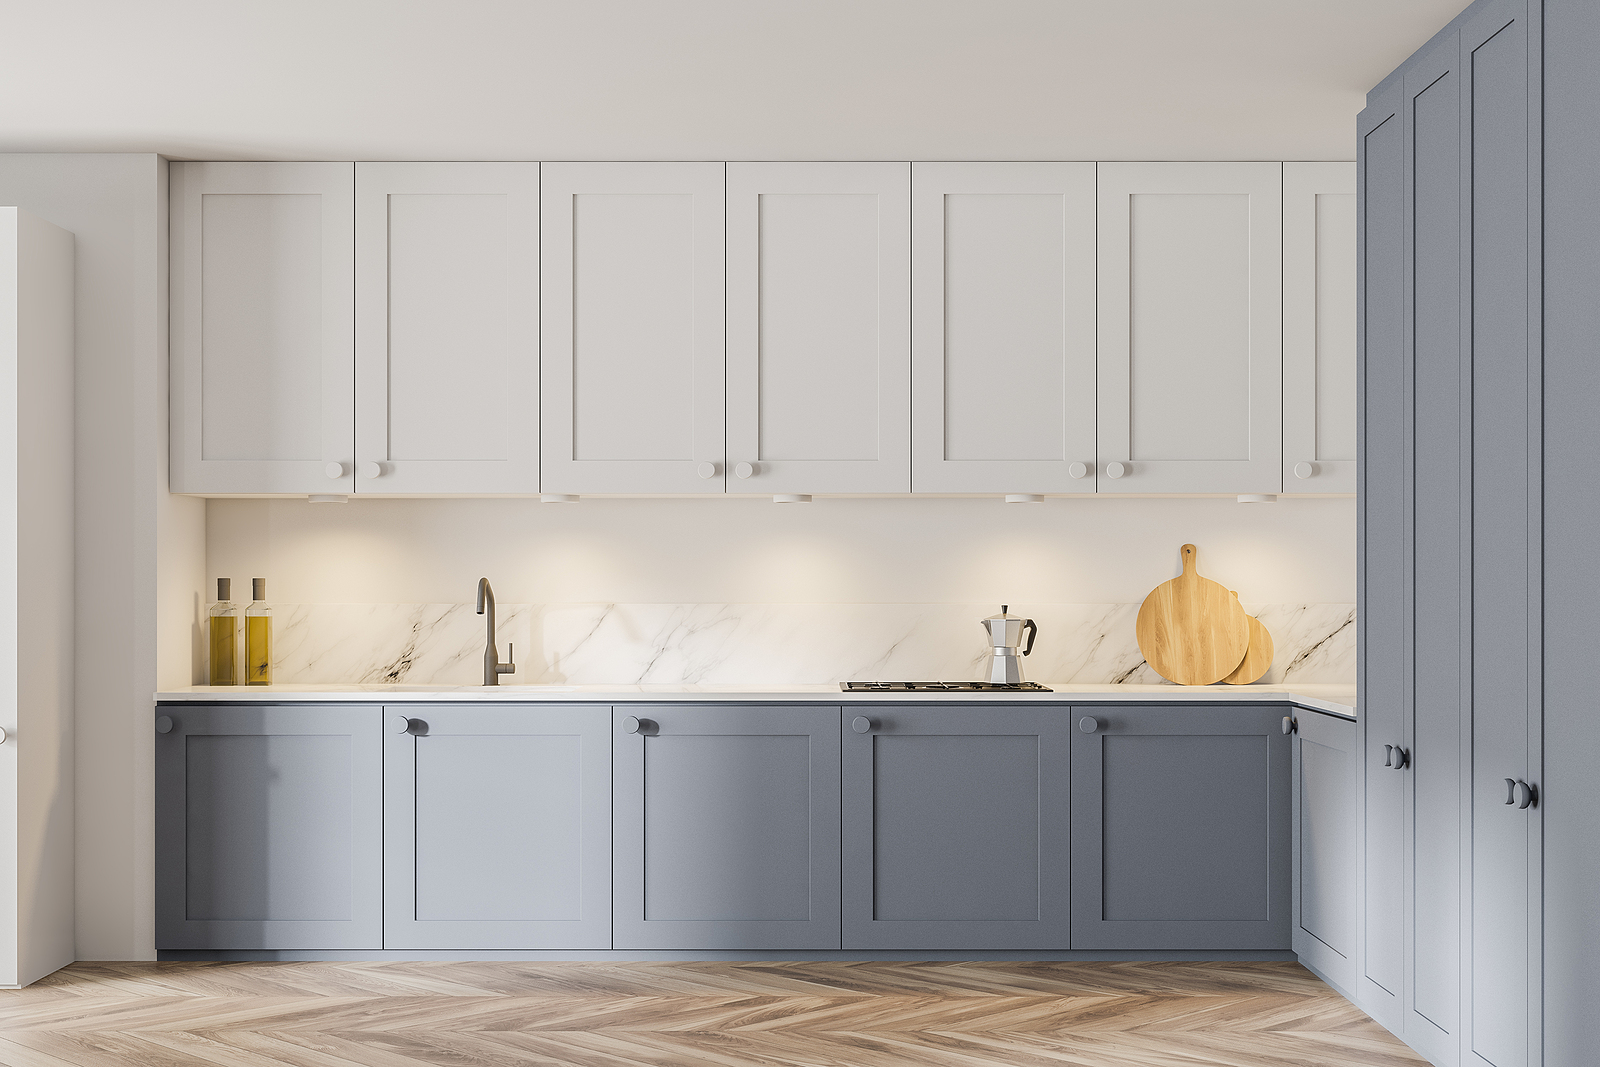 Kitchen Cabinet Color Trends for 2022 - Cabinetdoors.com